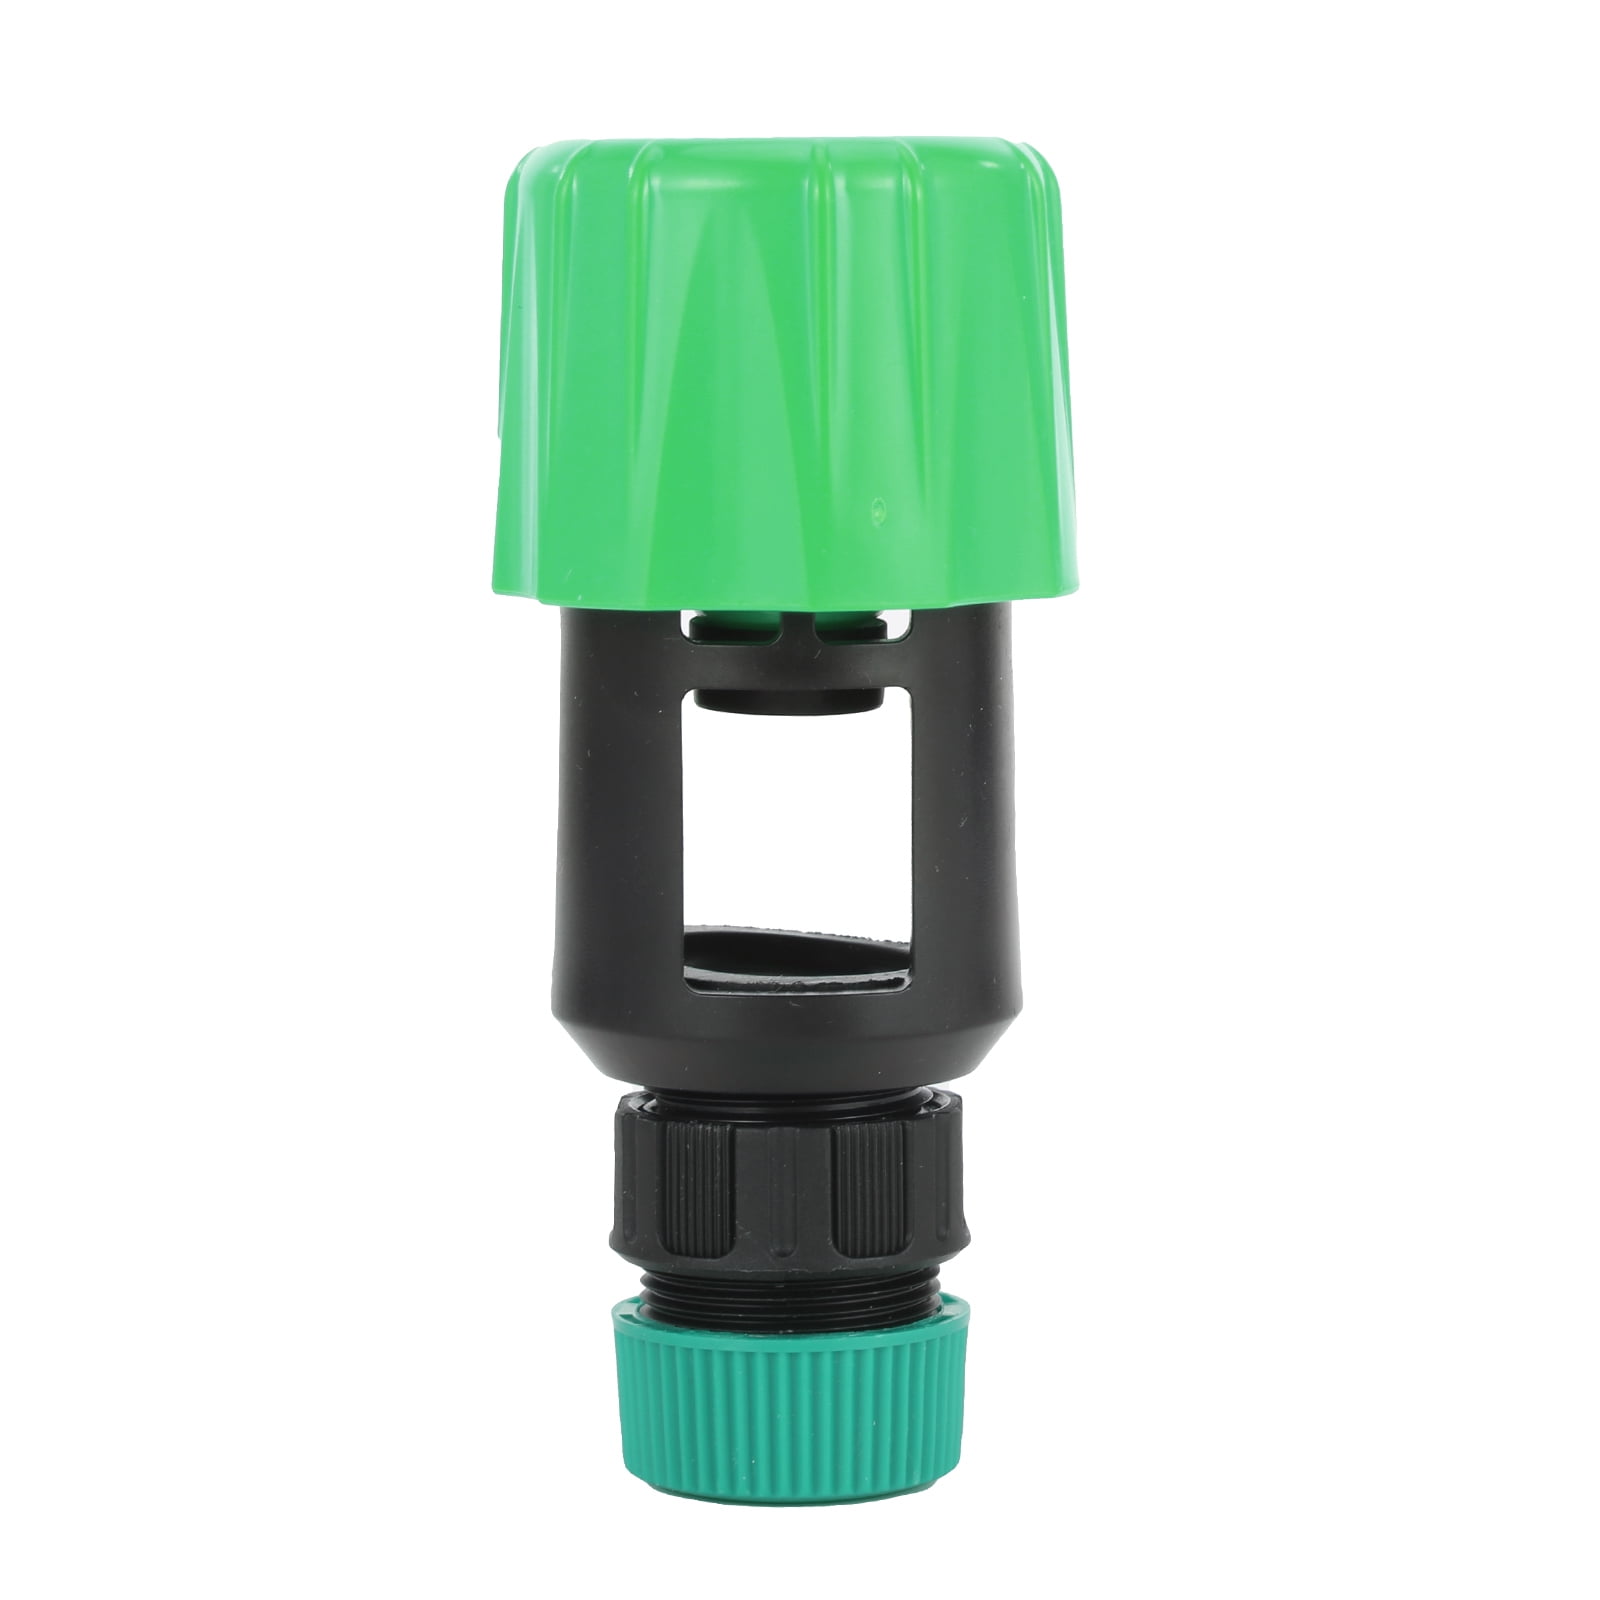 TAOtTAO Universal Water Tap to Garden Hose Pipe Connector Mixer Kitchen Tap Adapter D